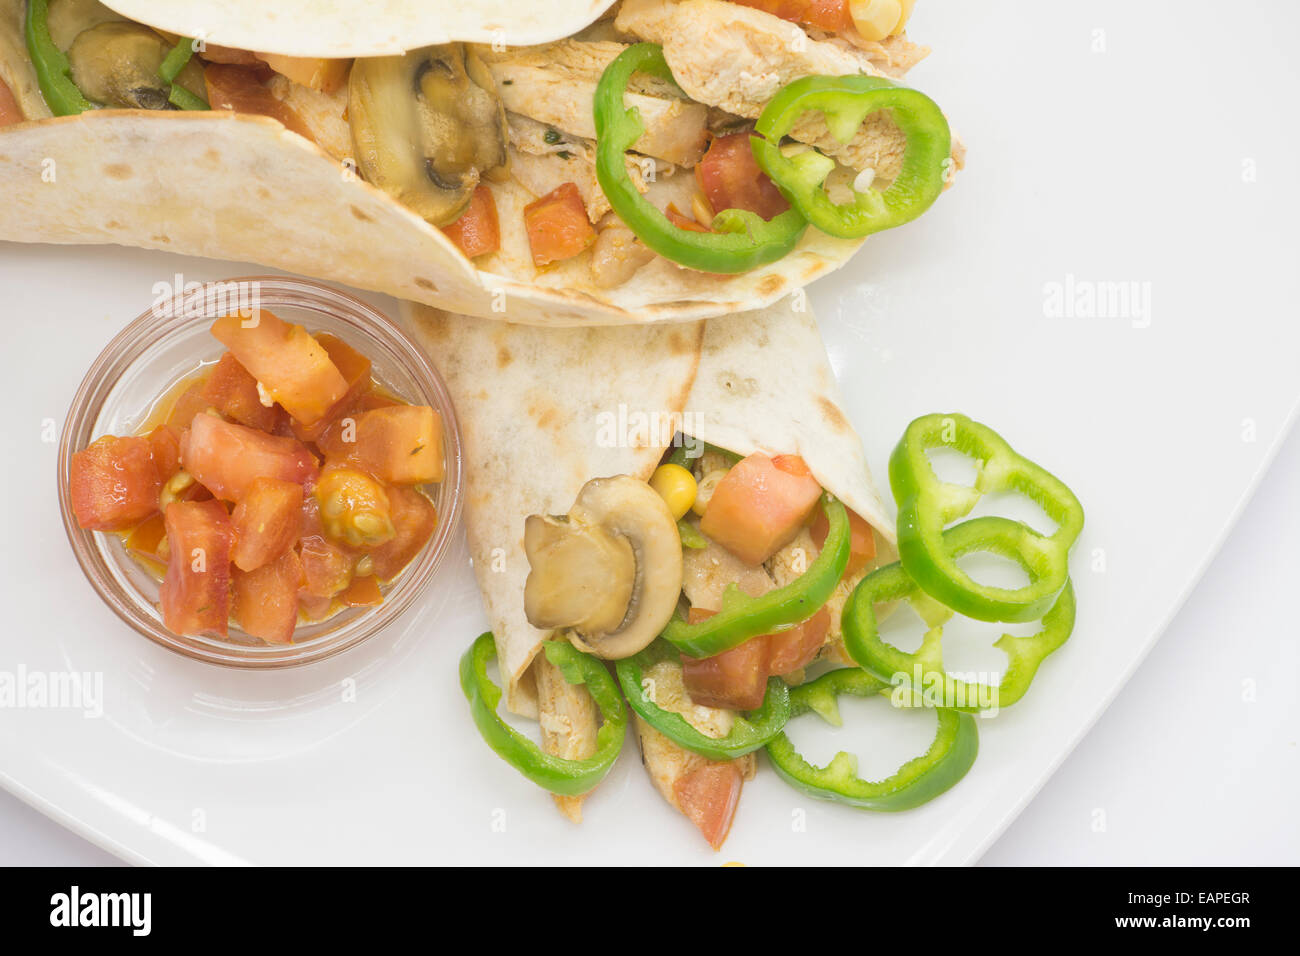 Mexican fajitas, chicken and vegetables, with tomatoes Extra. over white background Stock Photo